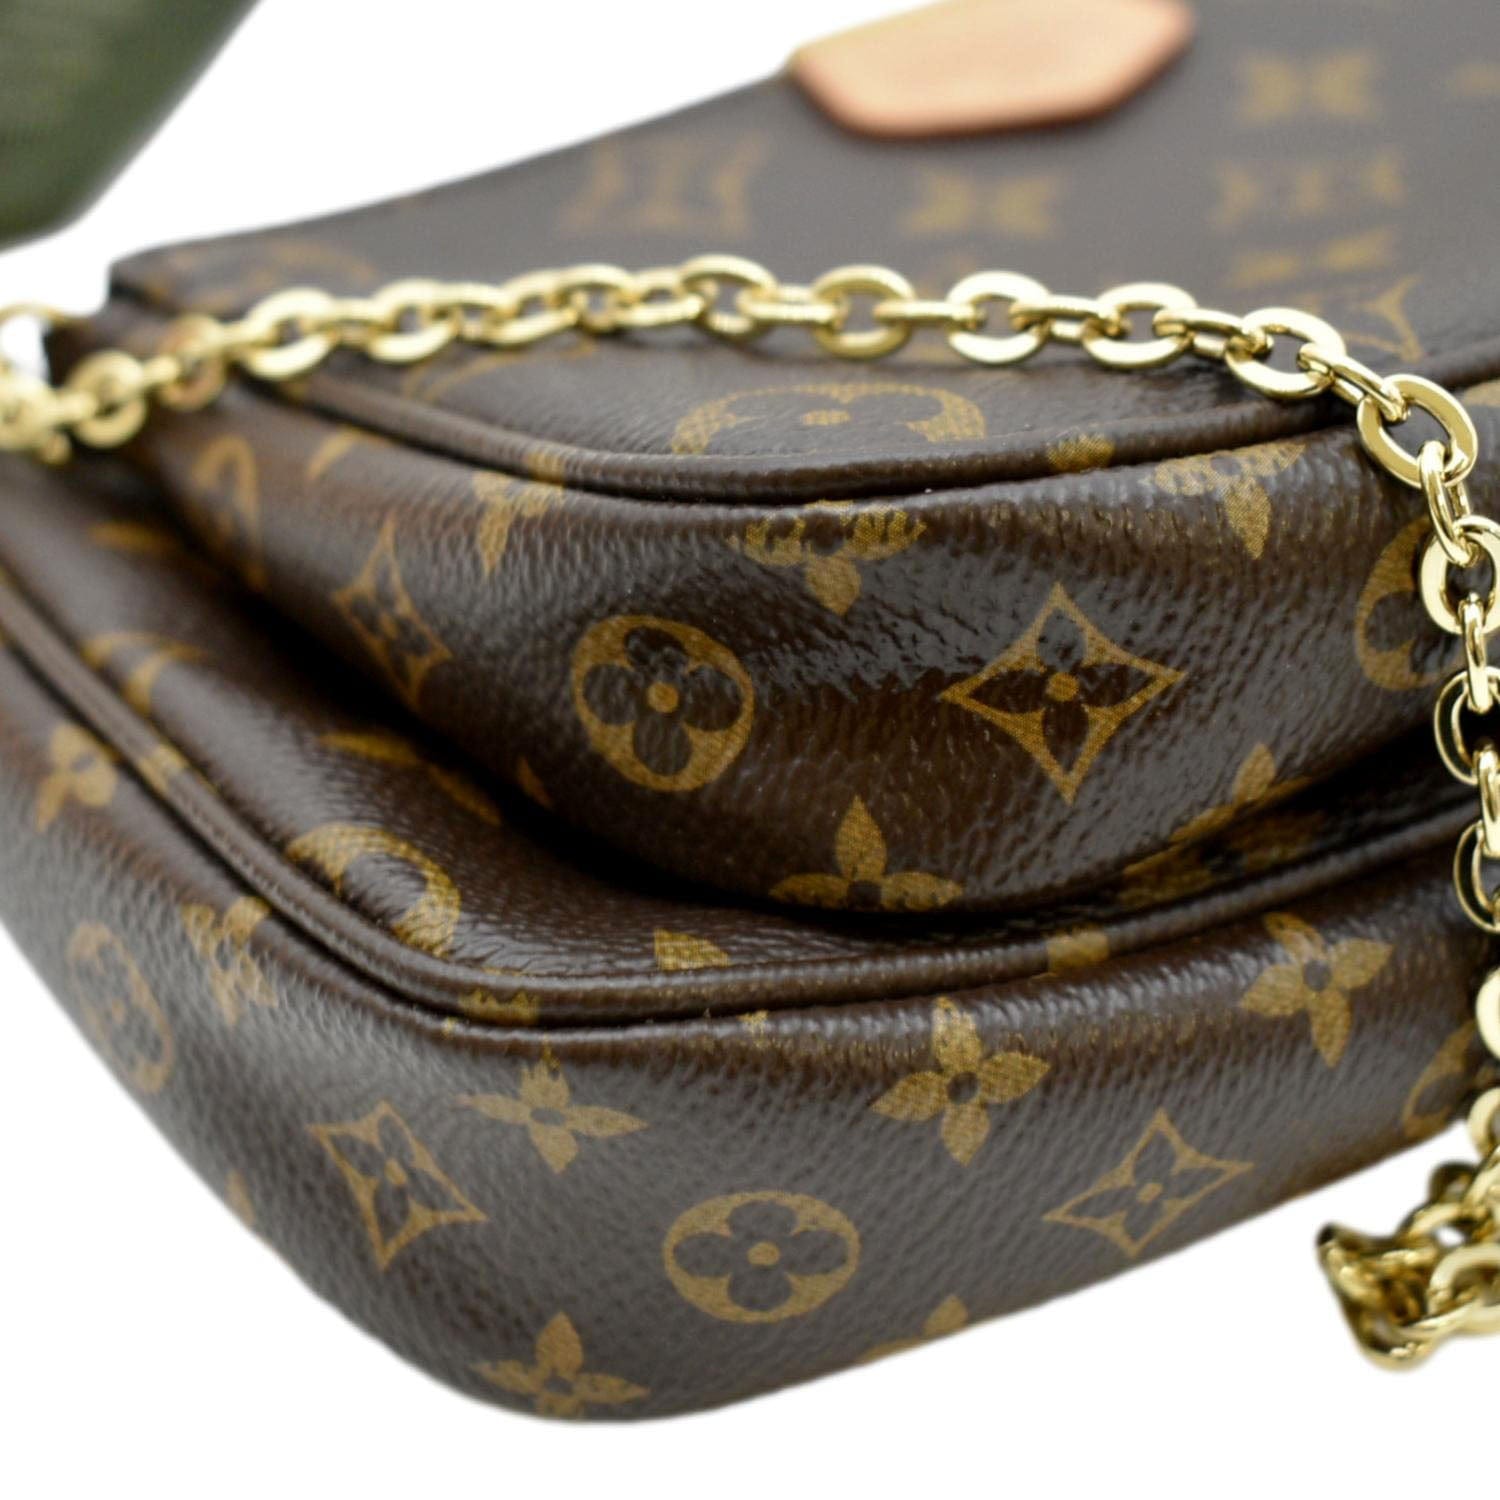 Designer Luxury Handbags Purse Multi Pochette Bag Real Leather Coated  Canvas Womens Bags Top Quality 3 Triple Strap Chain Shoulder Bag From  Designergoodsstore, $24.61